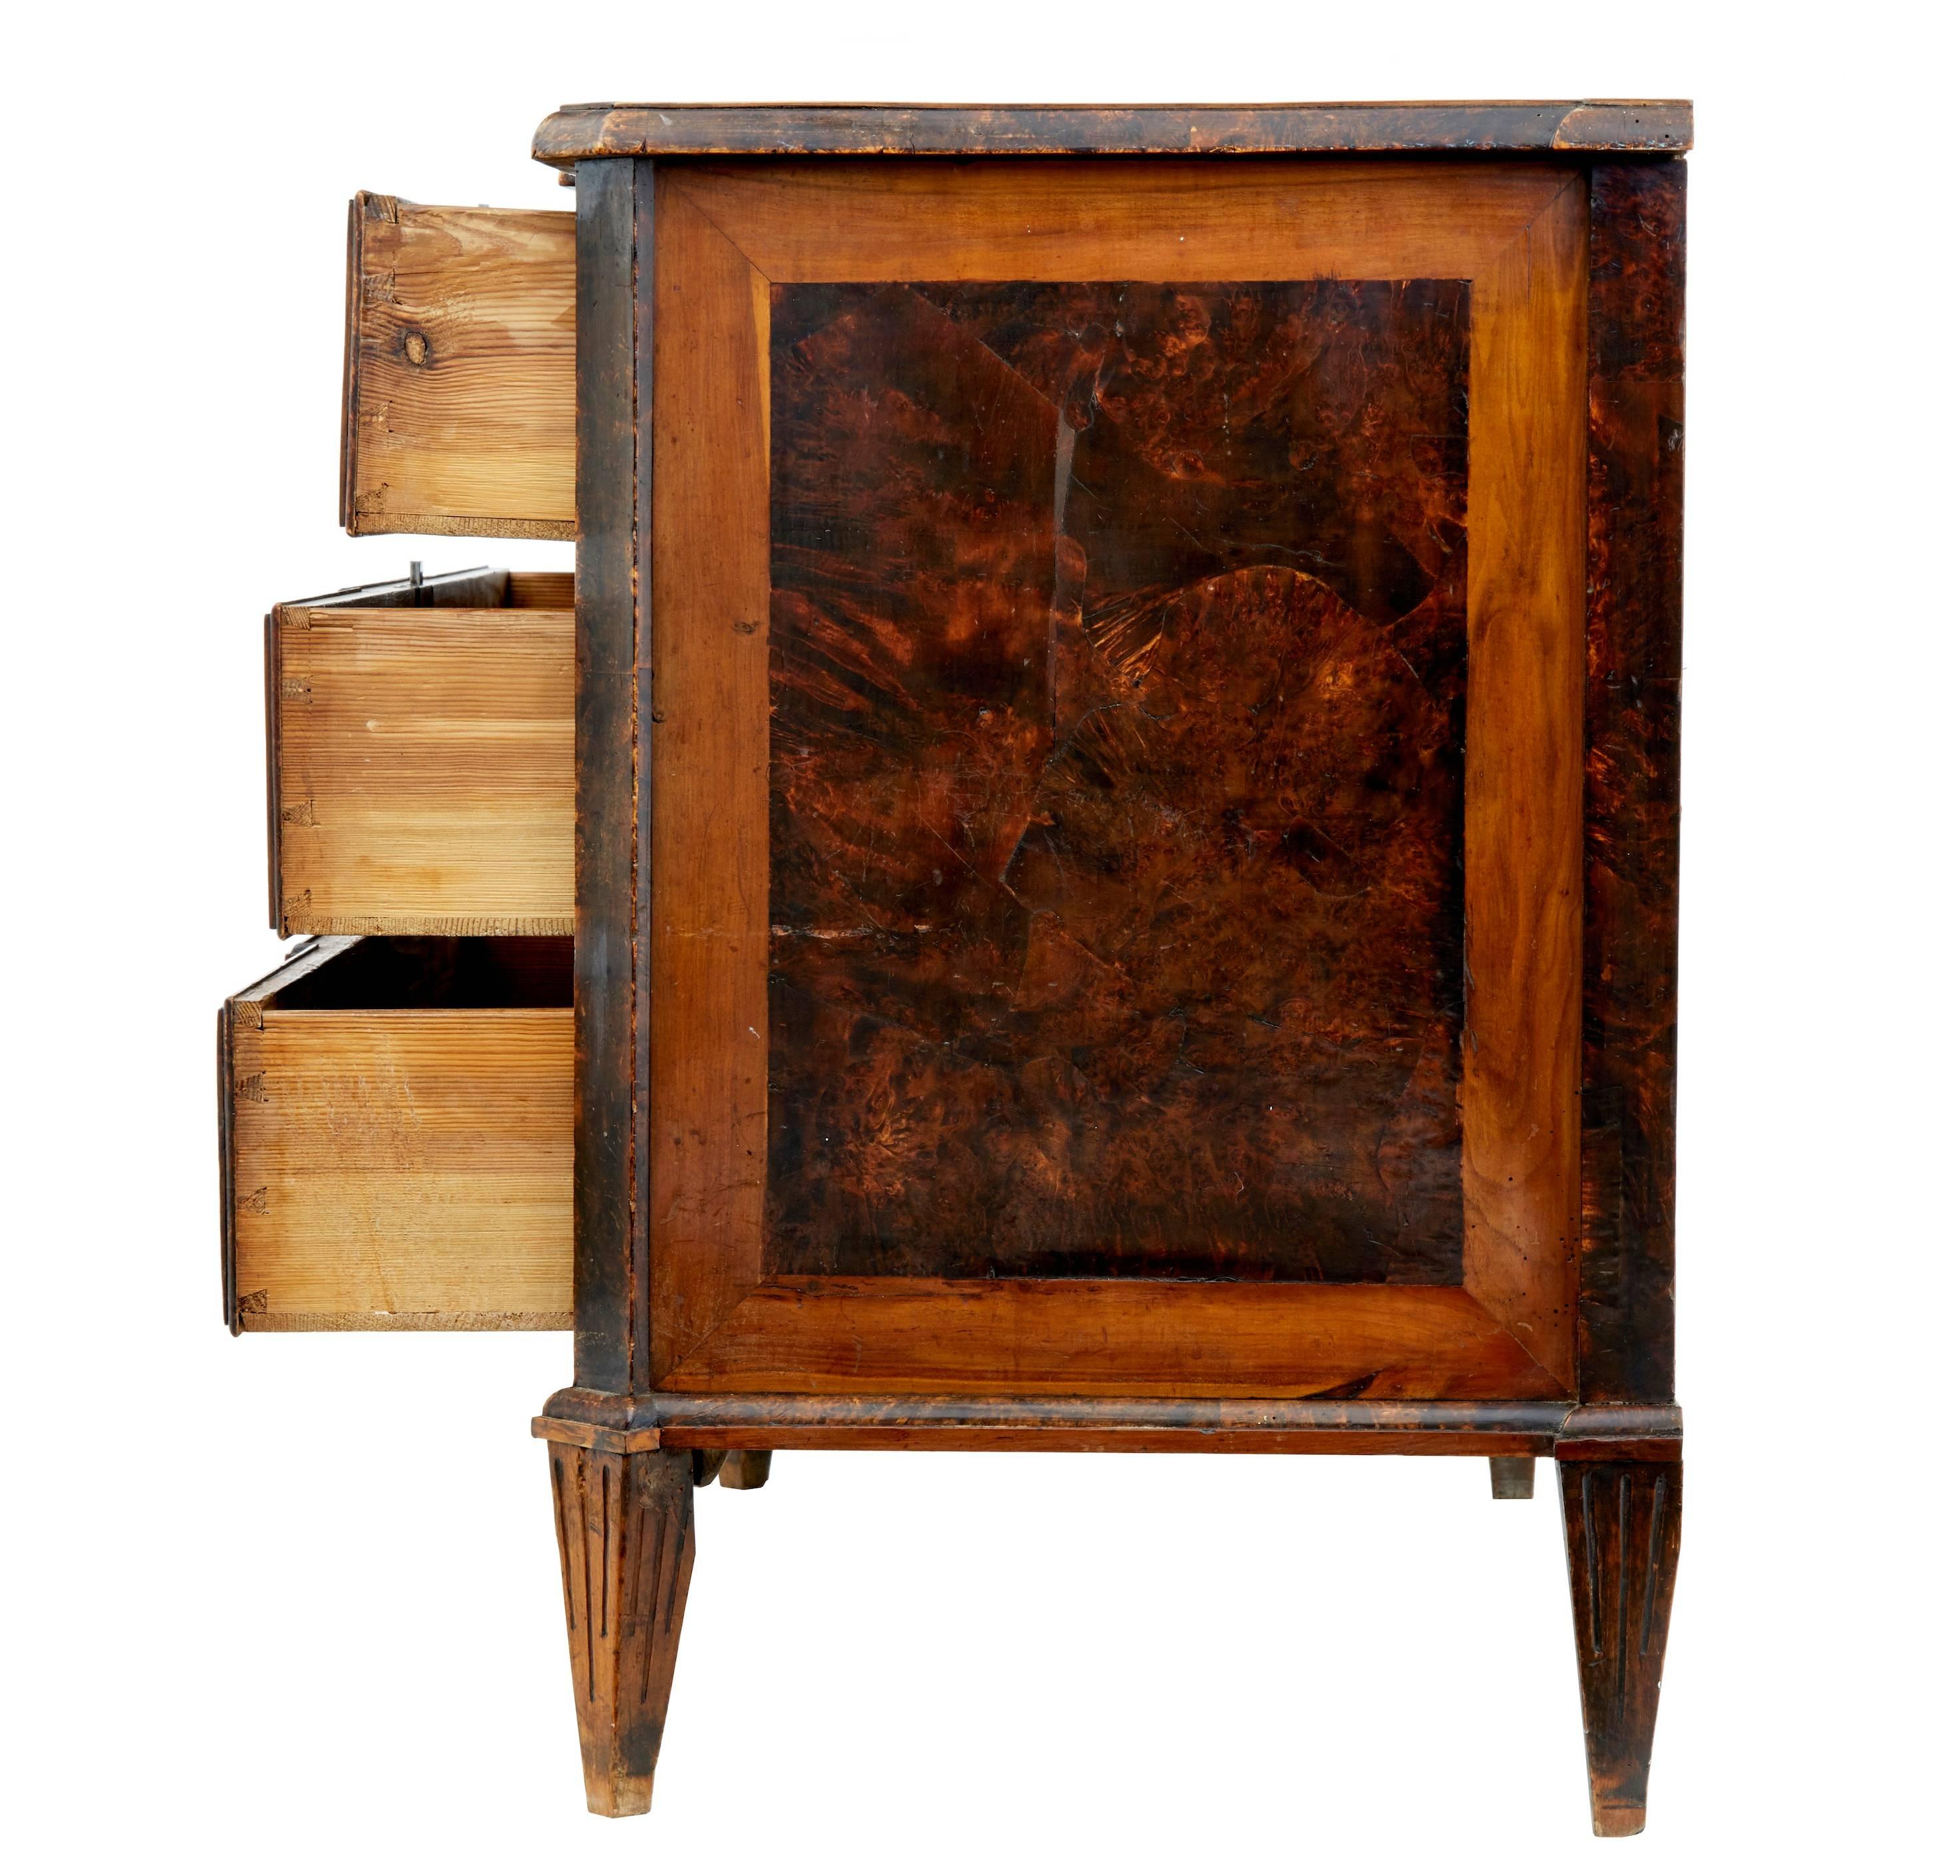 Woodwork Quality 19th Century Swedish Birch and Alder Root Commode Chest of Drawers